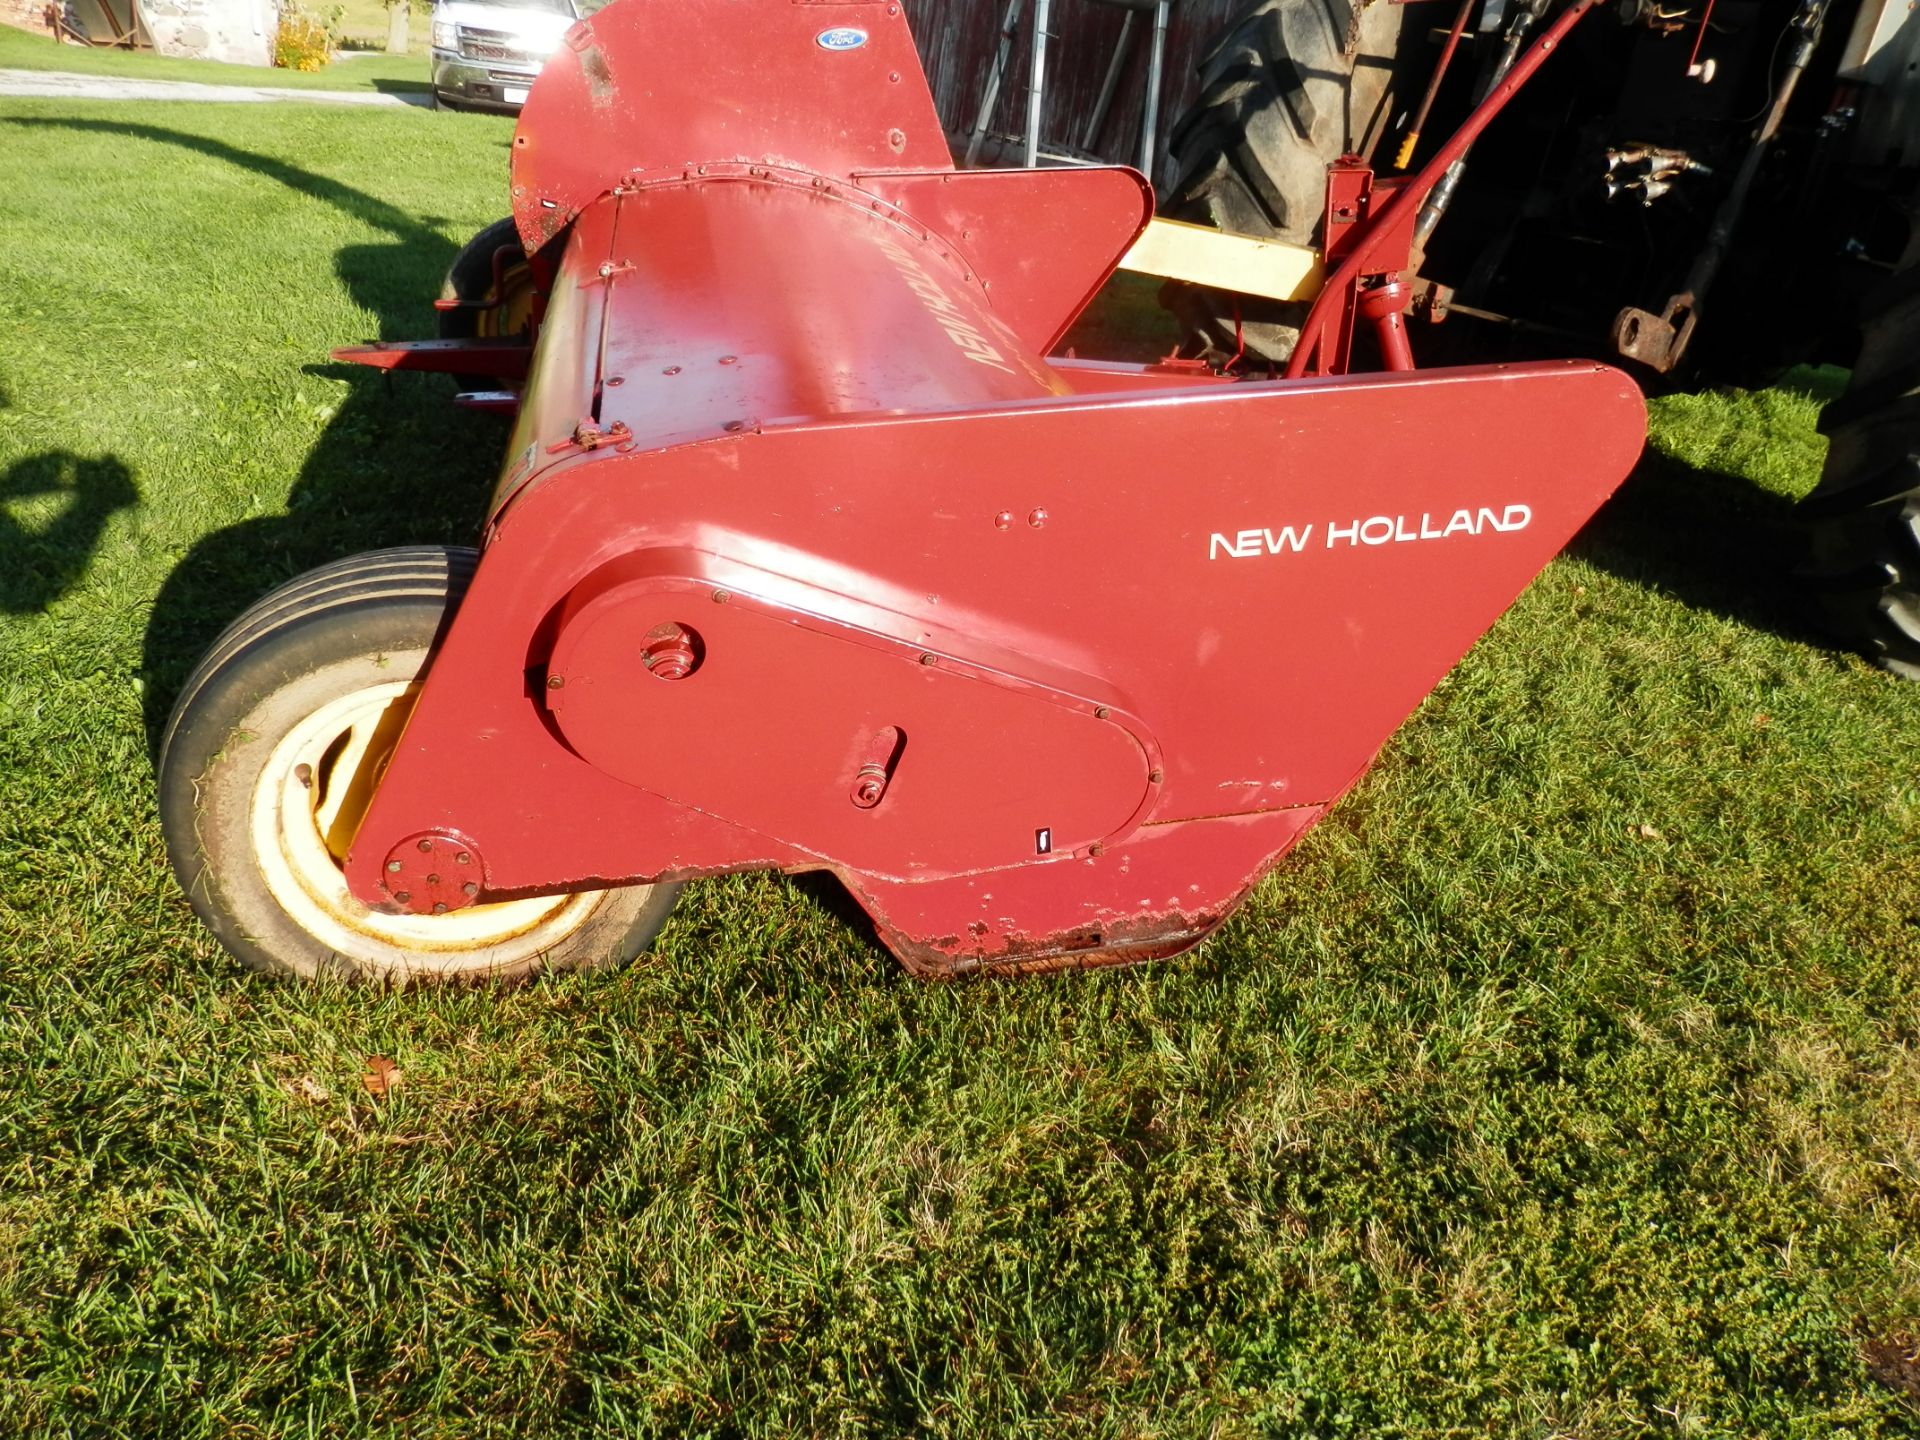 FORD NEW HOLLAND 38 FLAIL CHOPPER - Image 6 of 9